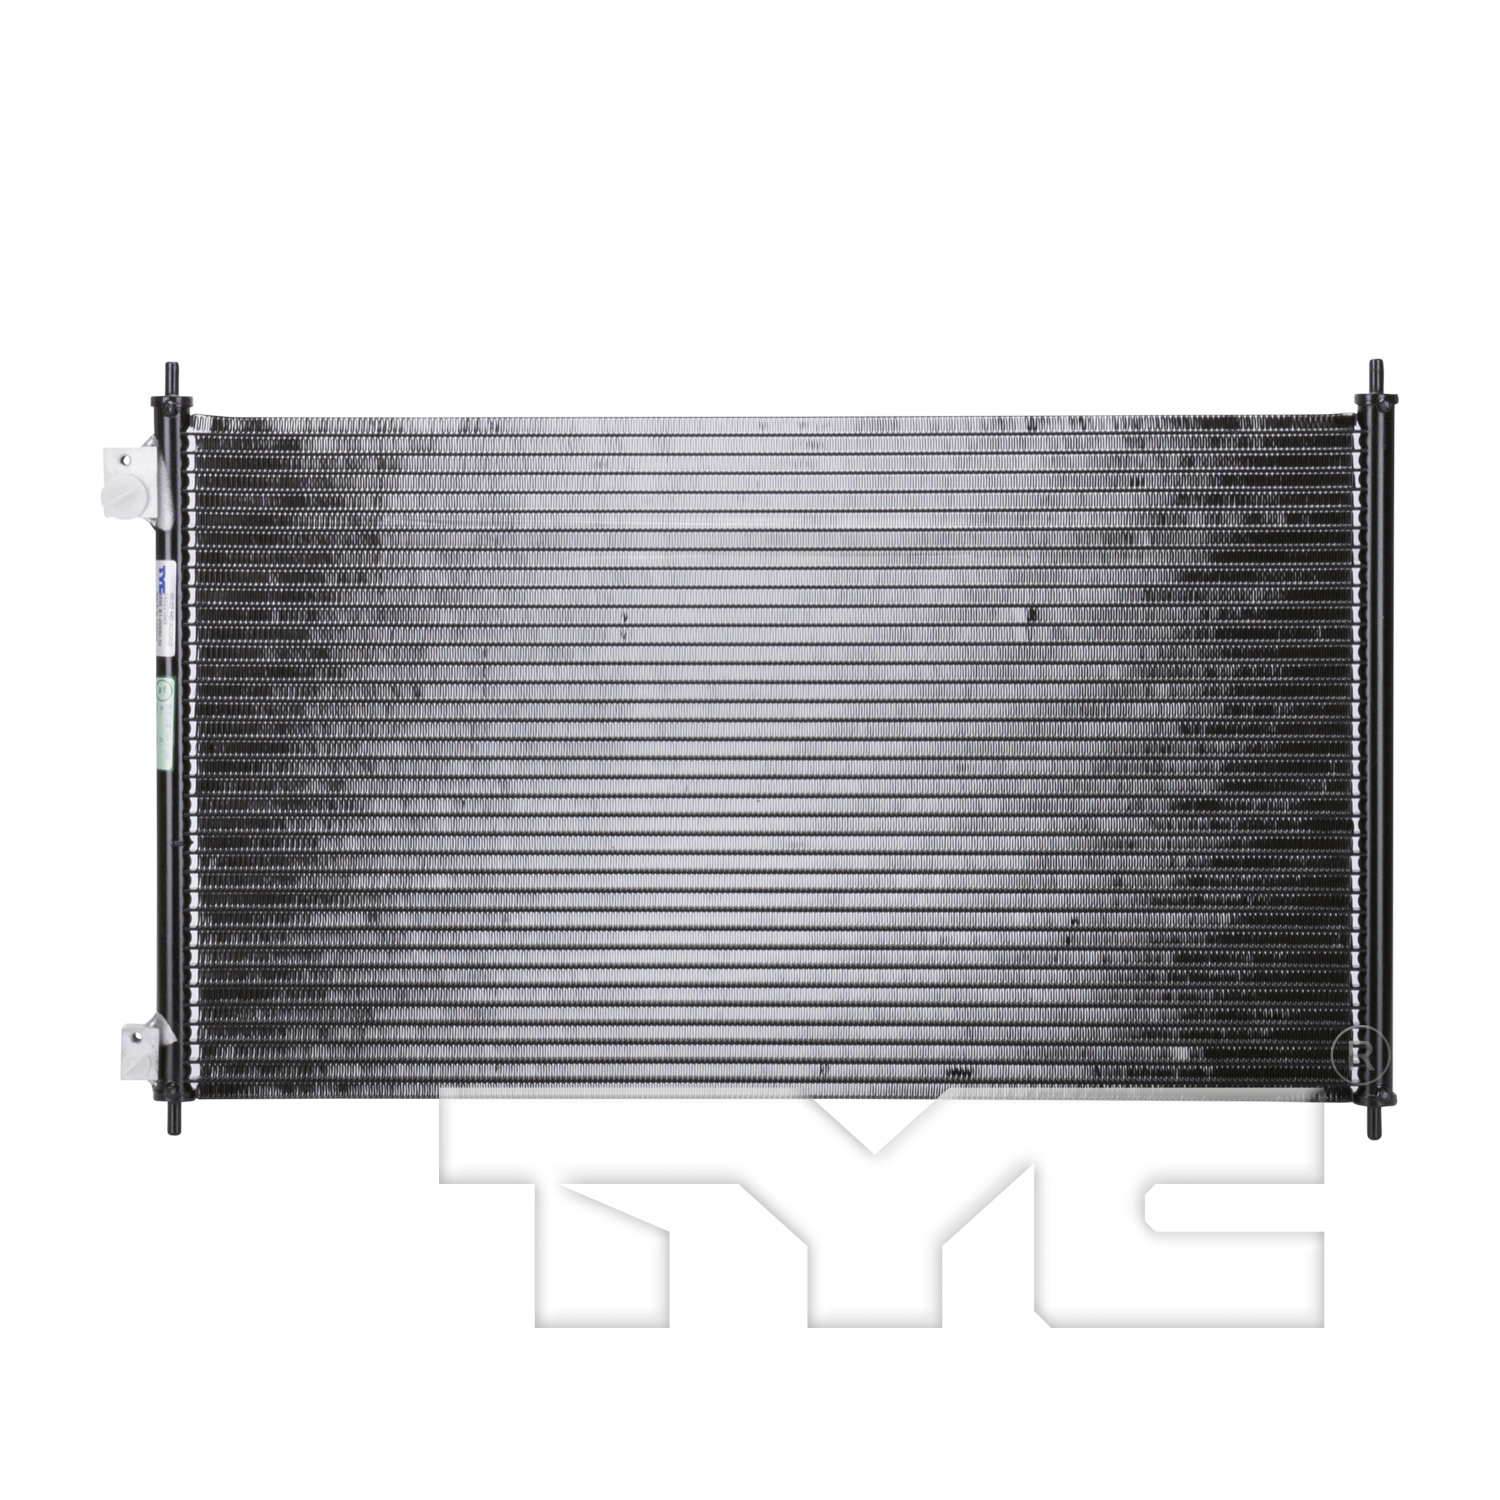 Aftermarket AC CONDENSERS for HONDA - ACCORD, ACCORD,98-99,Air conditioning condenser